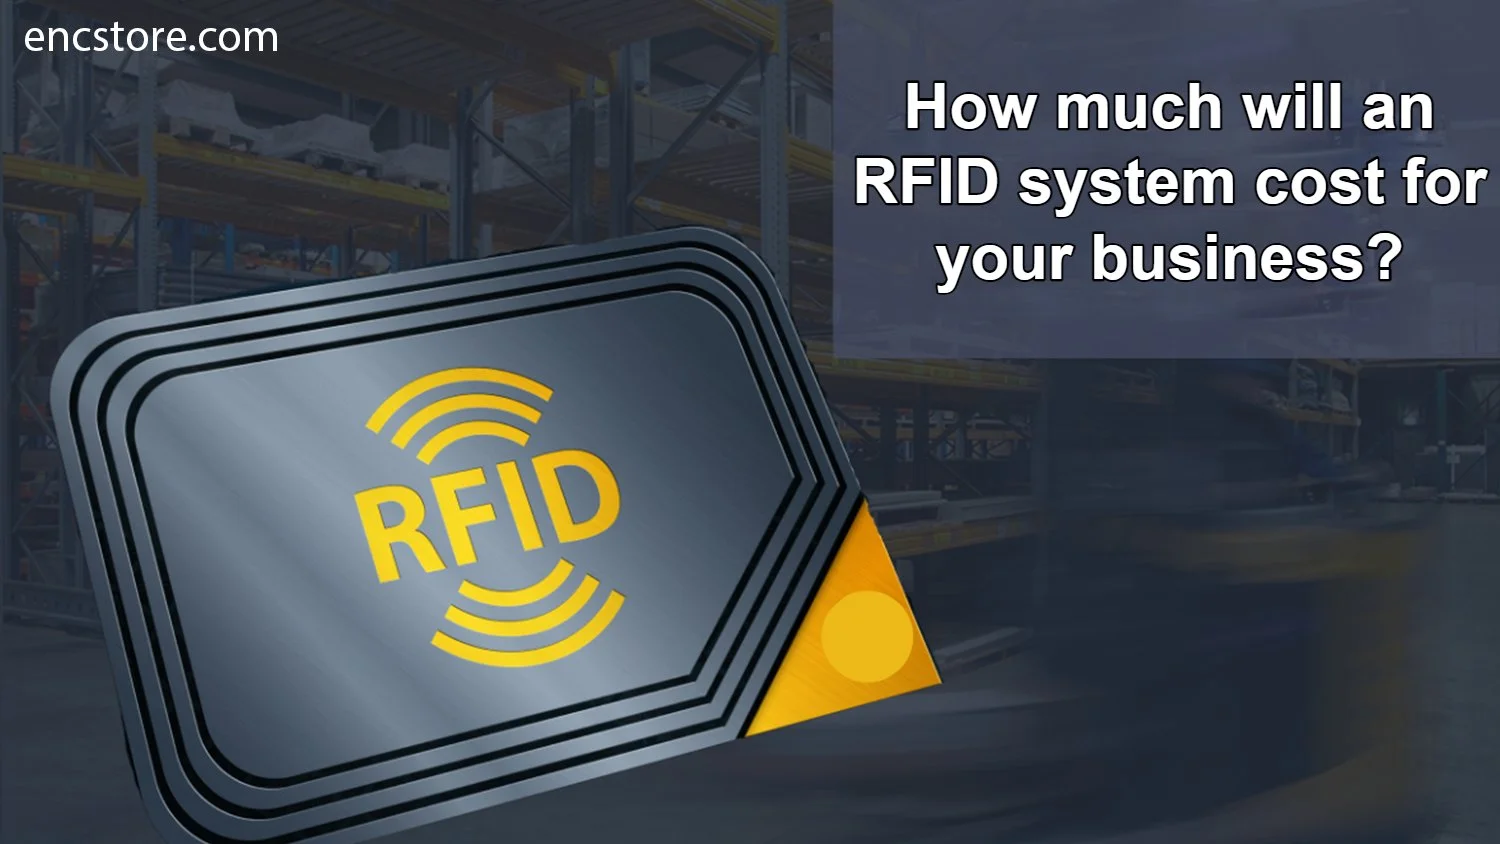 How much will a RFID system cost for your business